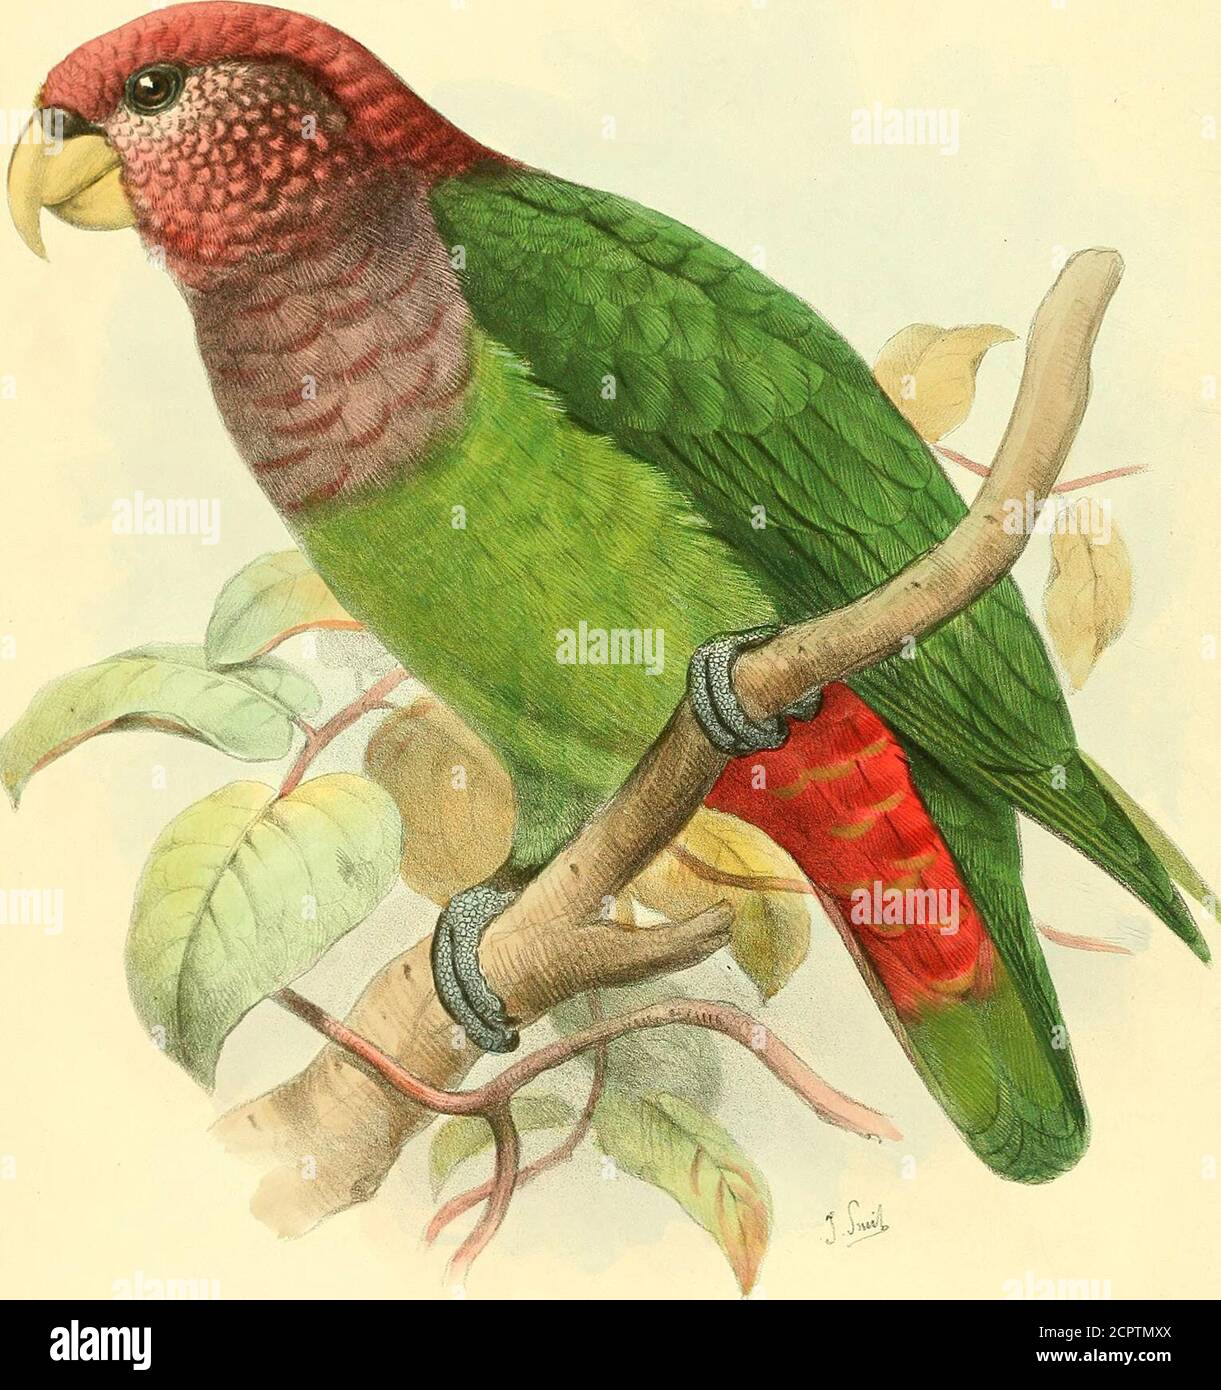 . Ornithological miscellany . J.Str.it hth ^ H.-mhart imp PIONUS CORALLINUS. ORNITHOLOGICAL MISCELLATff.. JSmit MtW. Tra.-nh.ai-t -t -mp- PIONUS TUMULTUOSUS. ON THE AMERICAN PARROTS OE THE GENUS PIONUS. By R L. SCLATER, M.A., Ph.D., F.R.S.(Plates LXXX. & LXXXI.) In spite of what certain Indian criticizers may say, Dr. Finschs Papageienis, in my opinion, one of the best bits of ornithological work of the presentday; and although it will no doubt be eventually superseded by a newmonograph, it will ever remain as the leading authority upon the subject upto the time of its publication. Having con Stock Photo